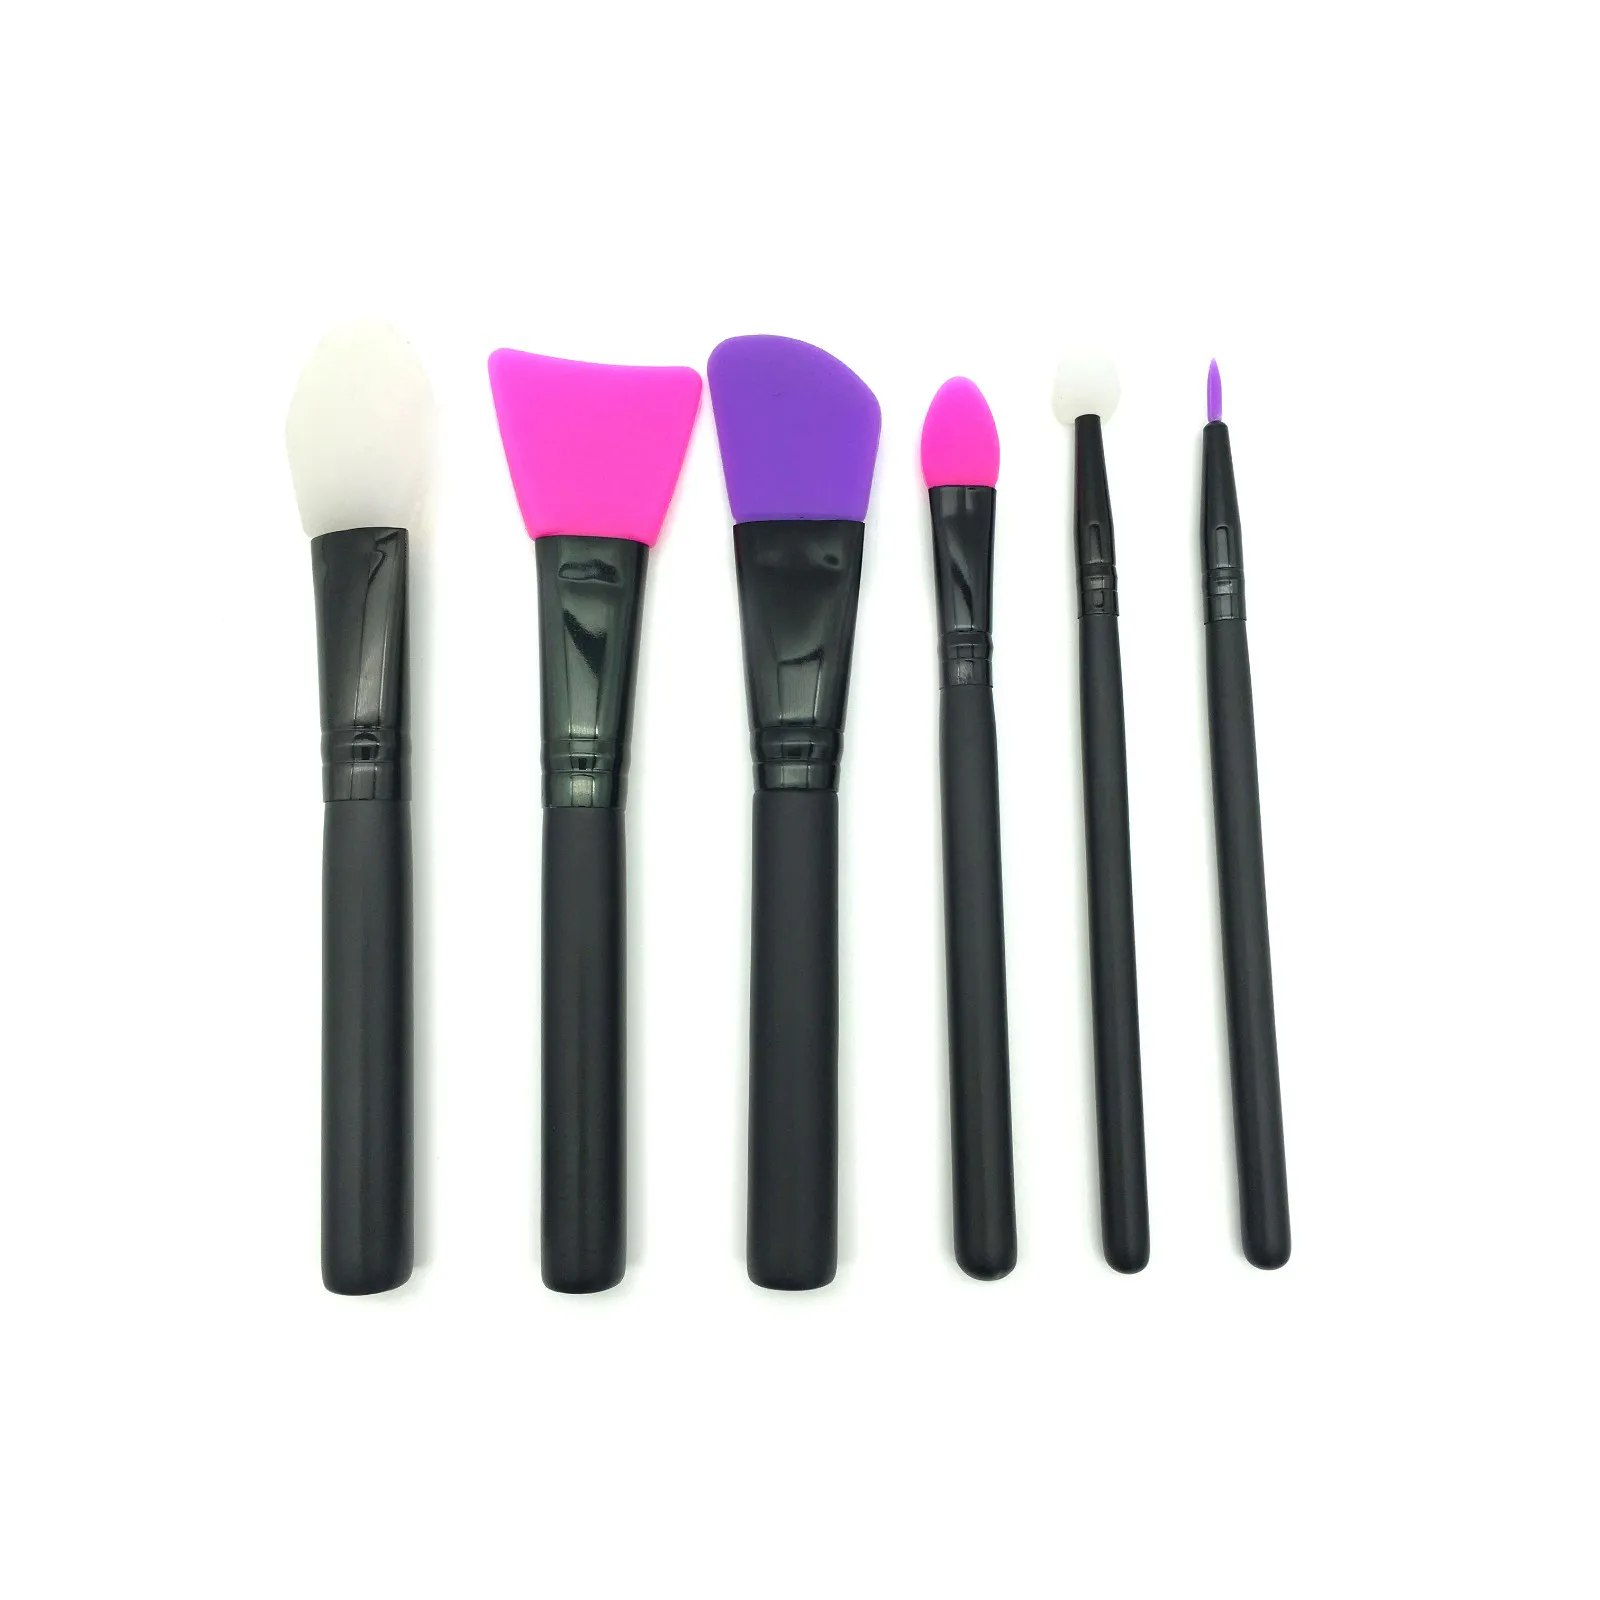 Suprabeauty sp low price makeup brushes supplier for liquid foundation